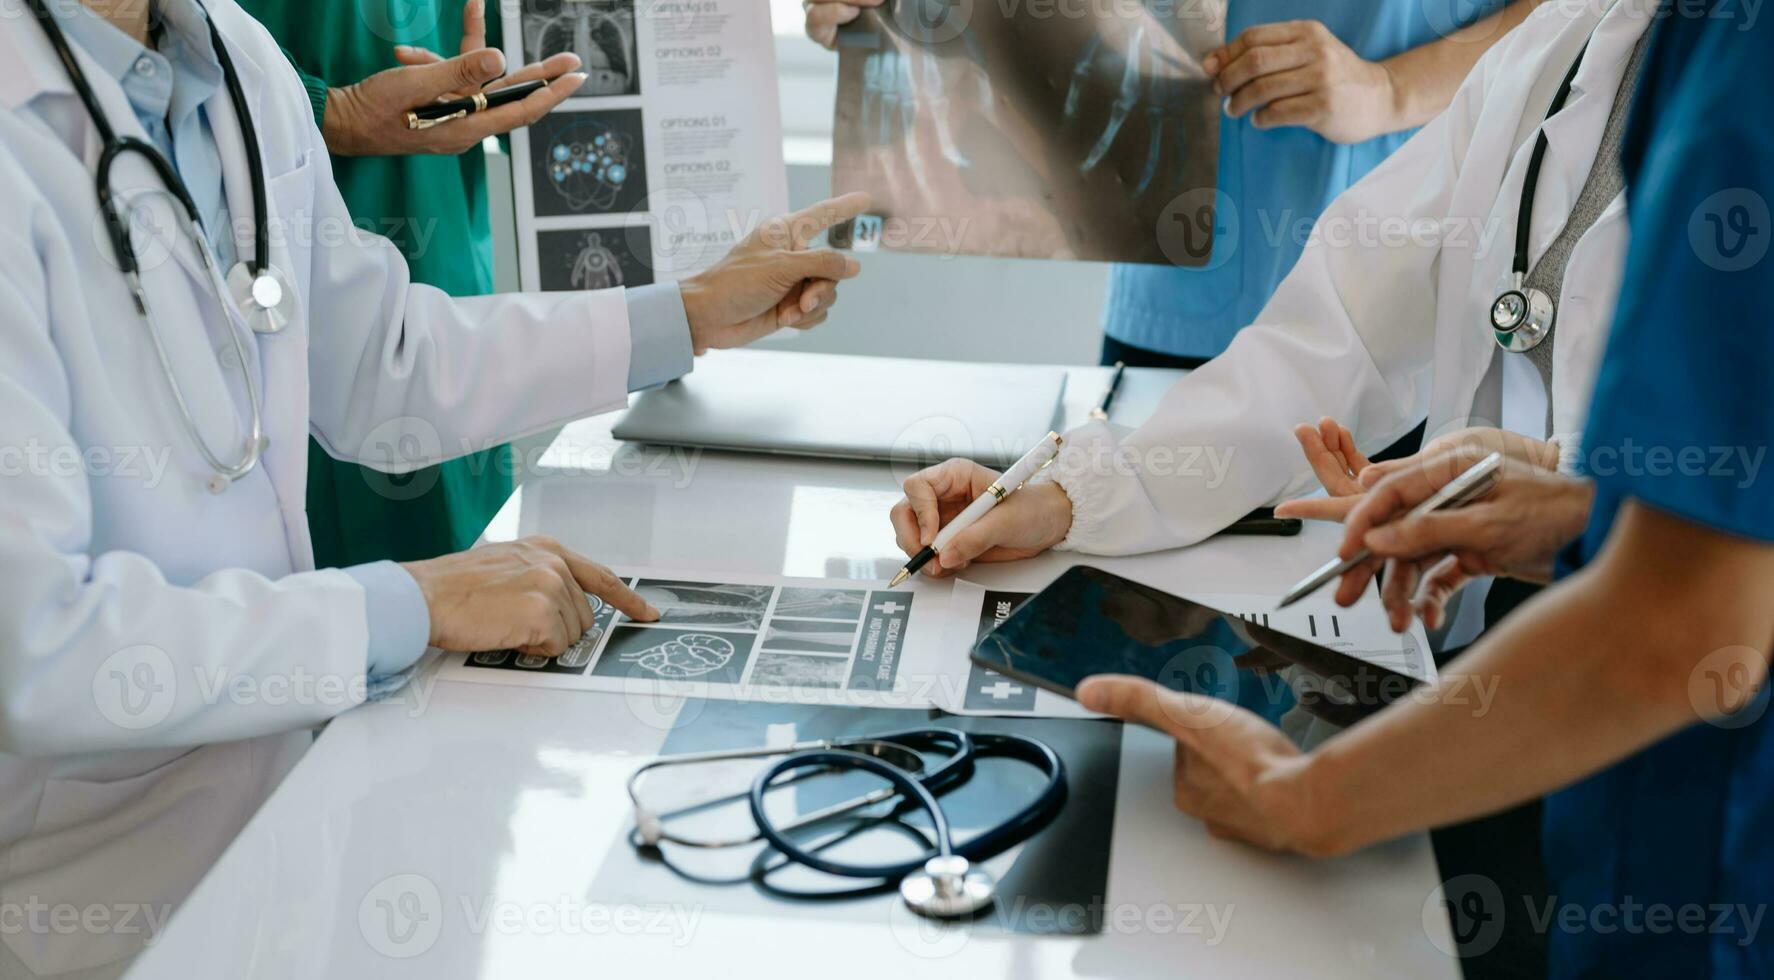 Medical team having a meeting with doctors in white lab coats and surgical scrubs seated at a table discussing a patients working online using computers in the medical industry photo